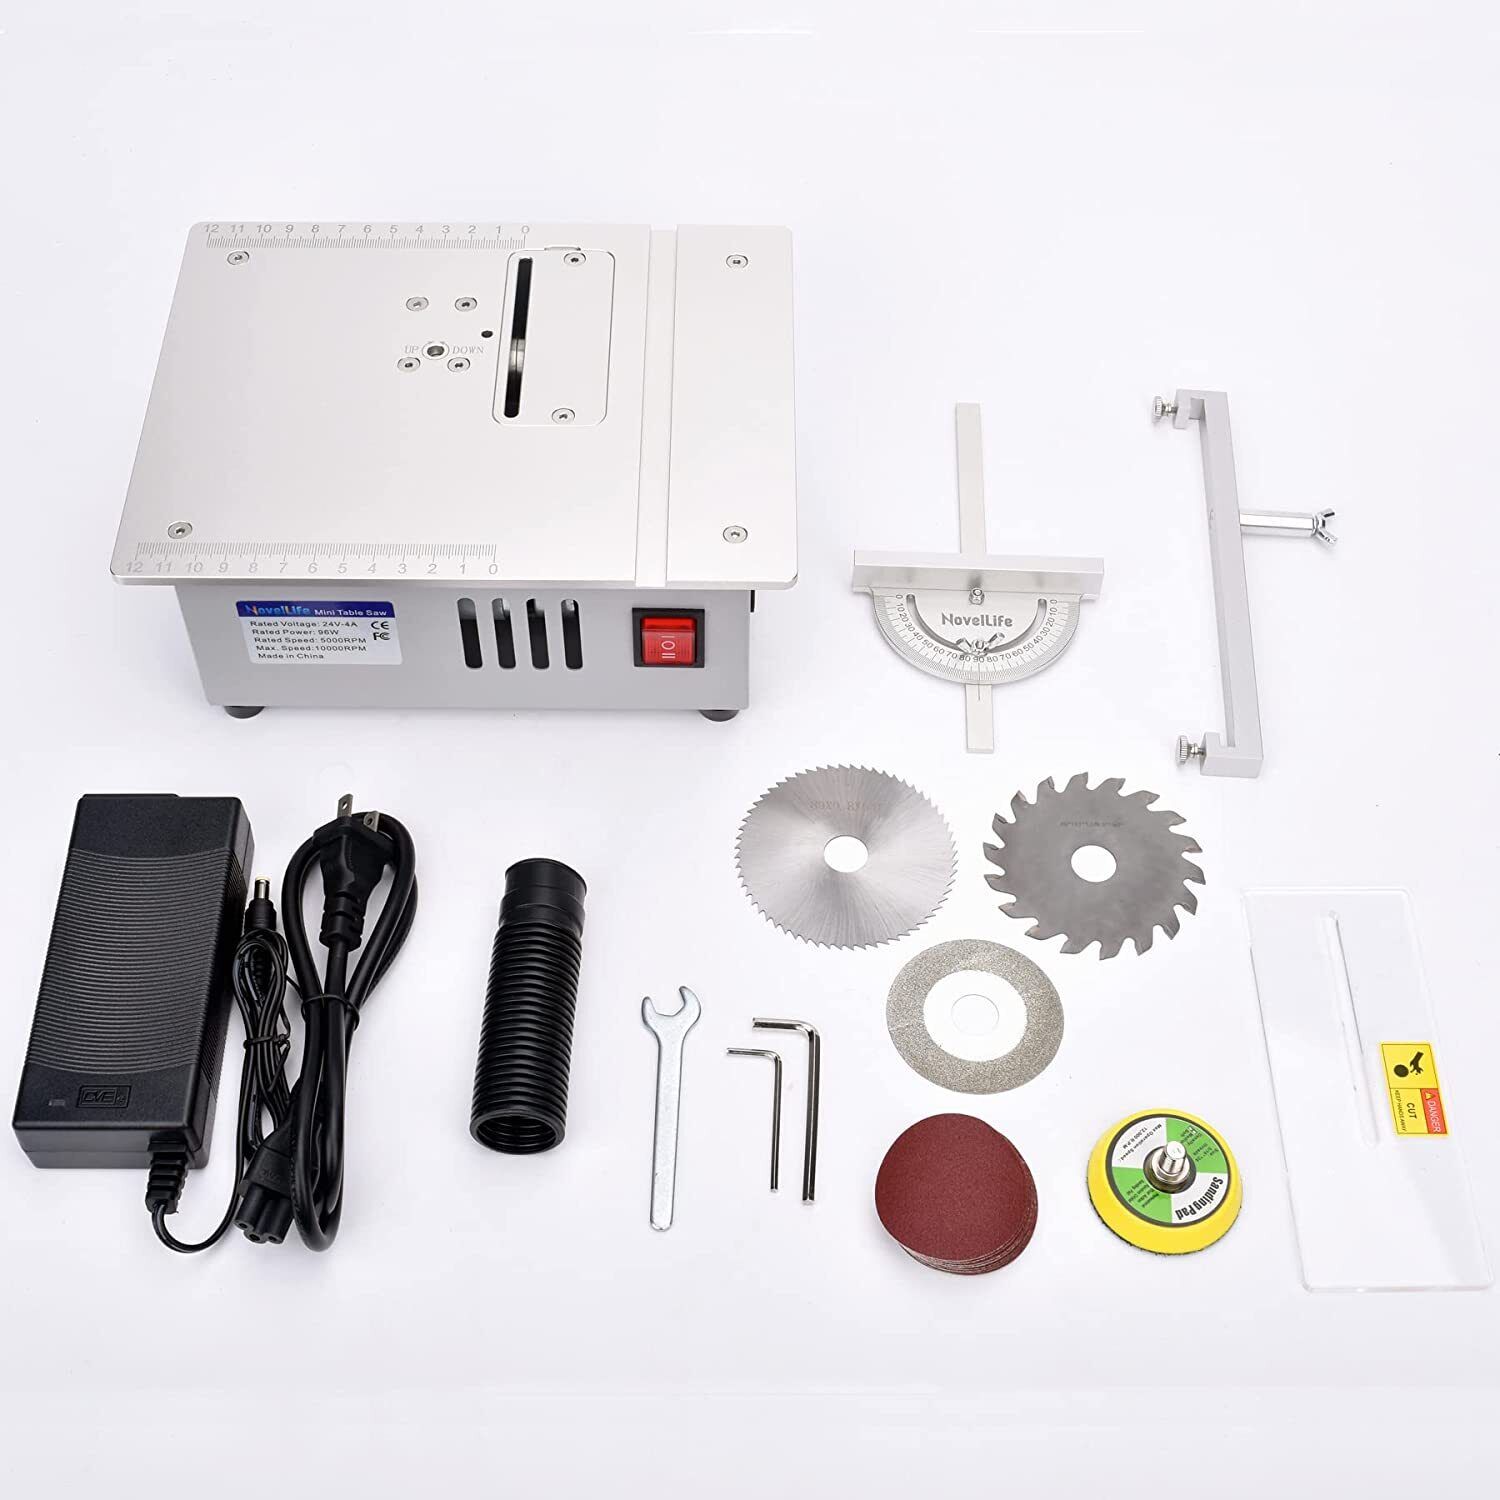 TOPCHANCES Mini Hobby Table Saw, Upgrade Table Saws Woodworking Desktop DIY Acrylic PCB Desktop Crafts Cutting Machine with Power Supply 63mm HSS Circ - 1